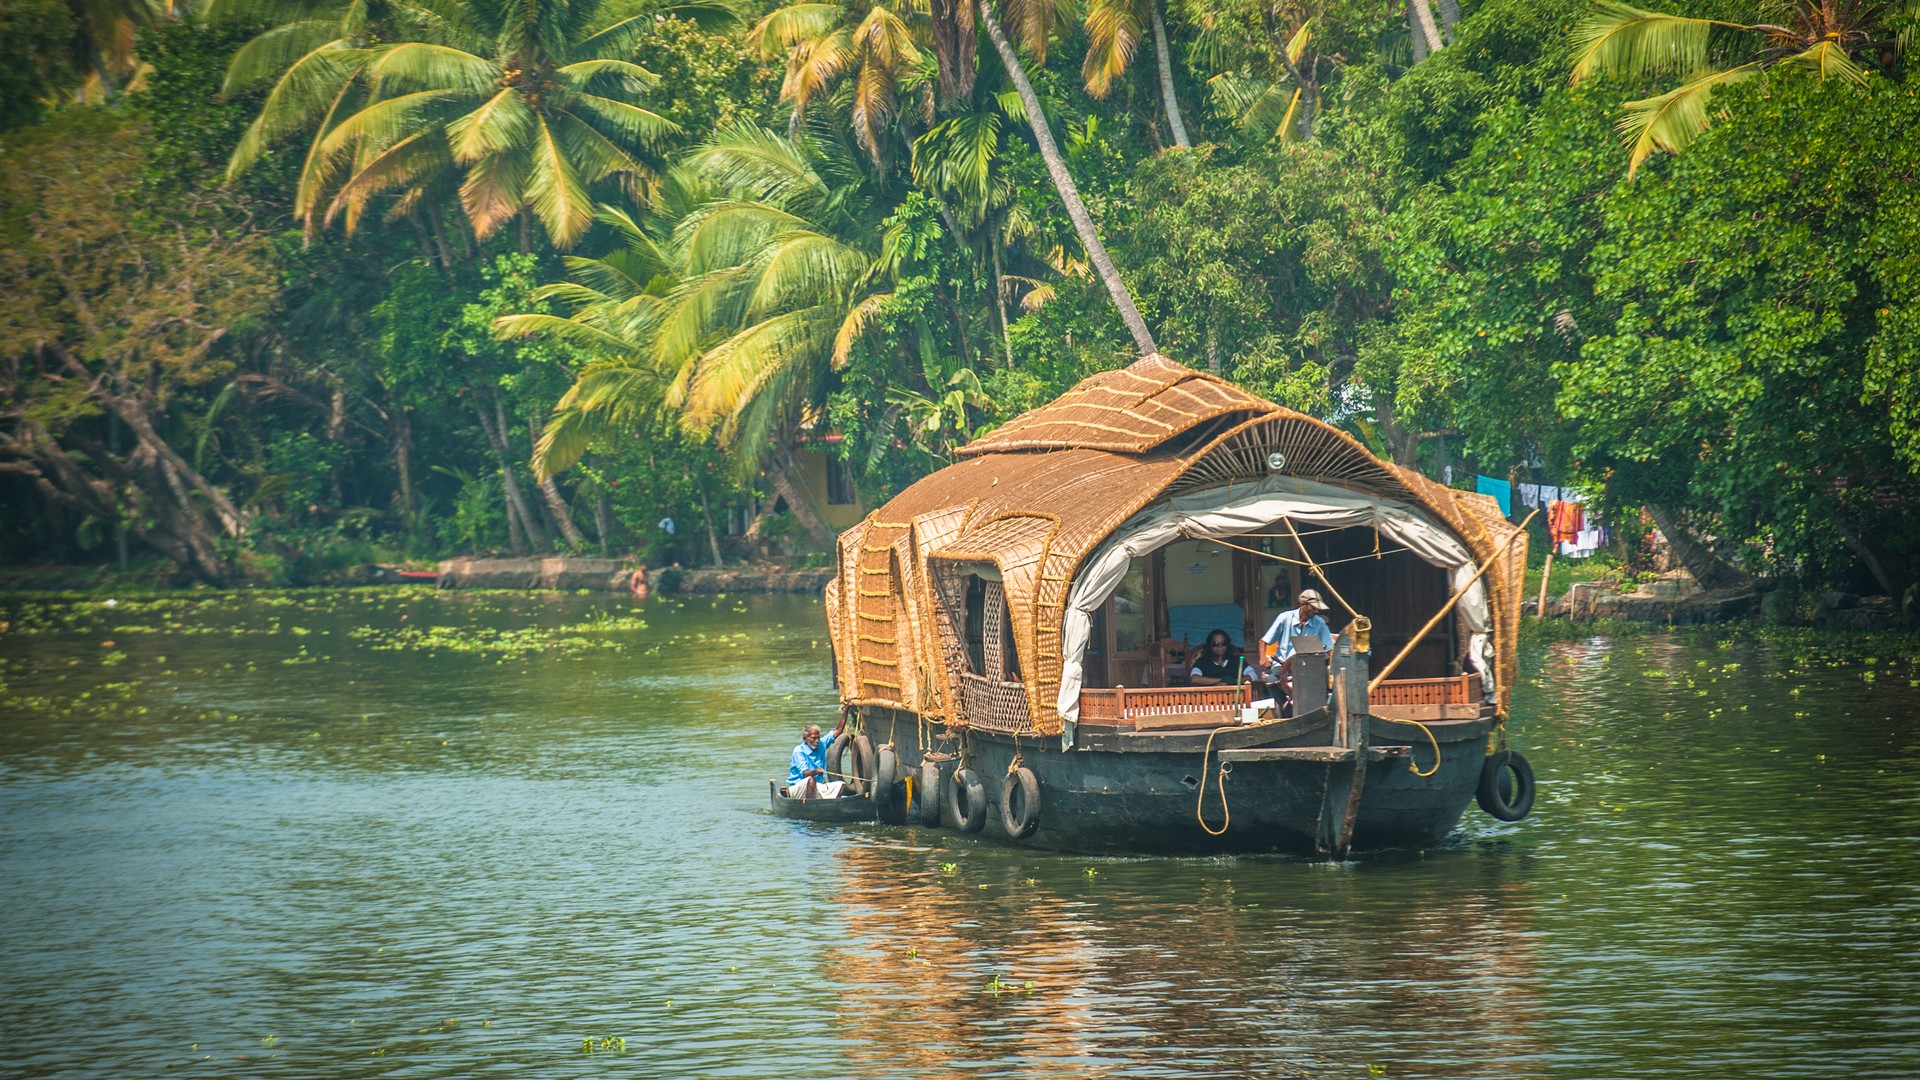 Choosing Alleppey Houseboat Cruise-Price, Packages and Timings